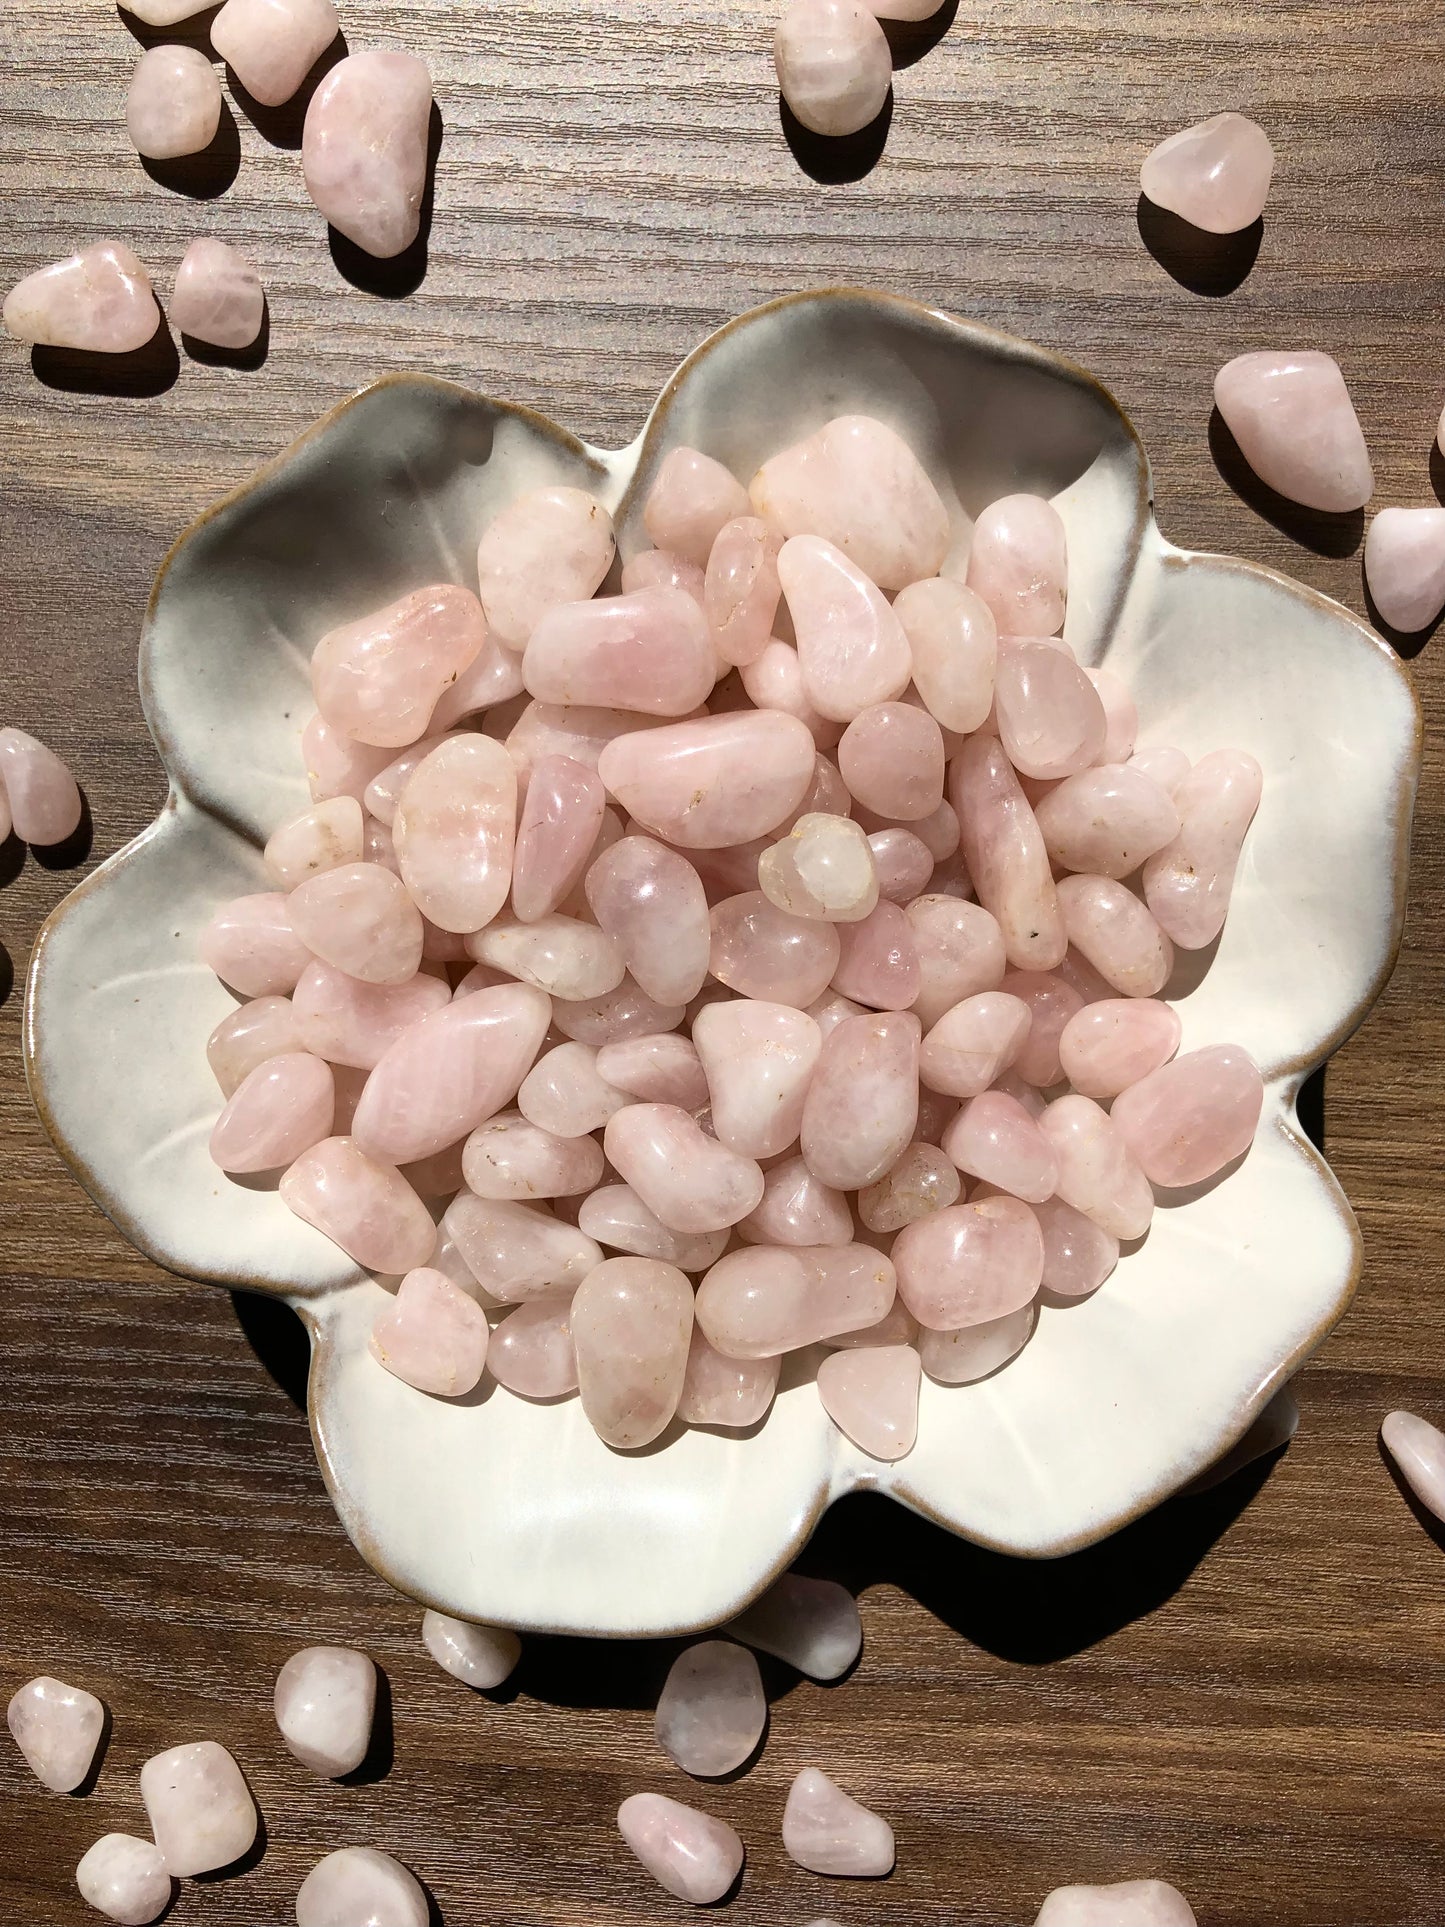 A downward picture of rose quartz stones sitting in a white, flower shaped bowl. There are scattered rose quartz stones around it. It sits on a dark wooden background.